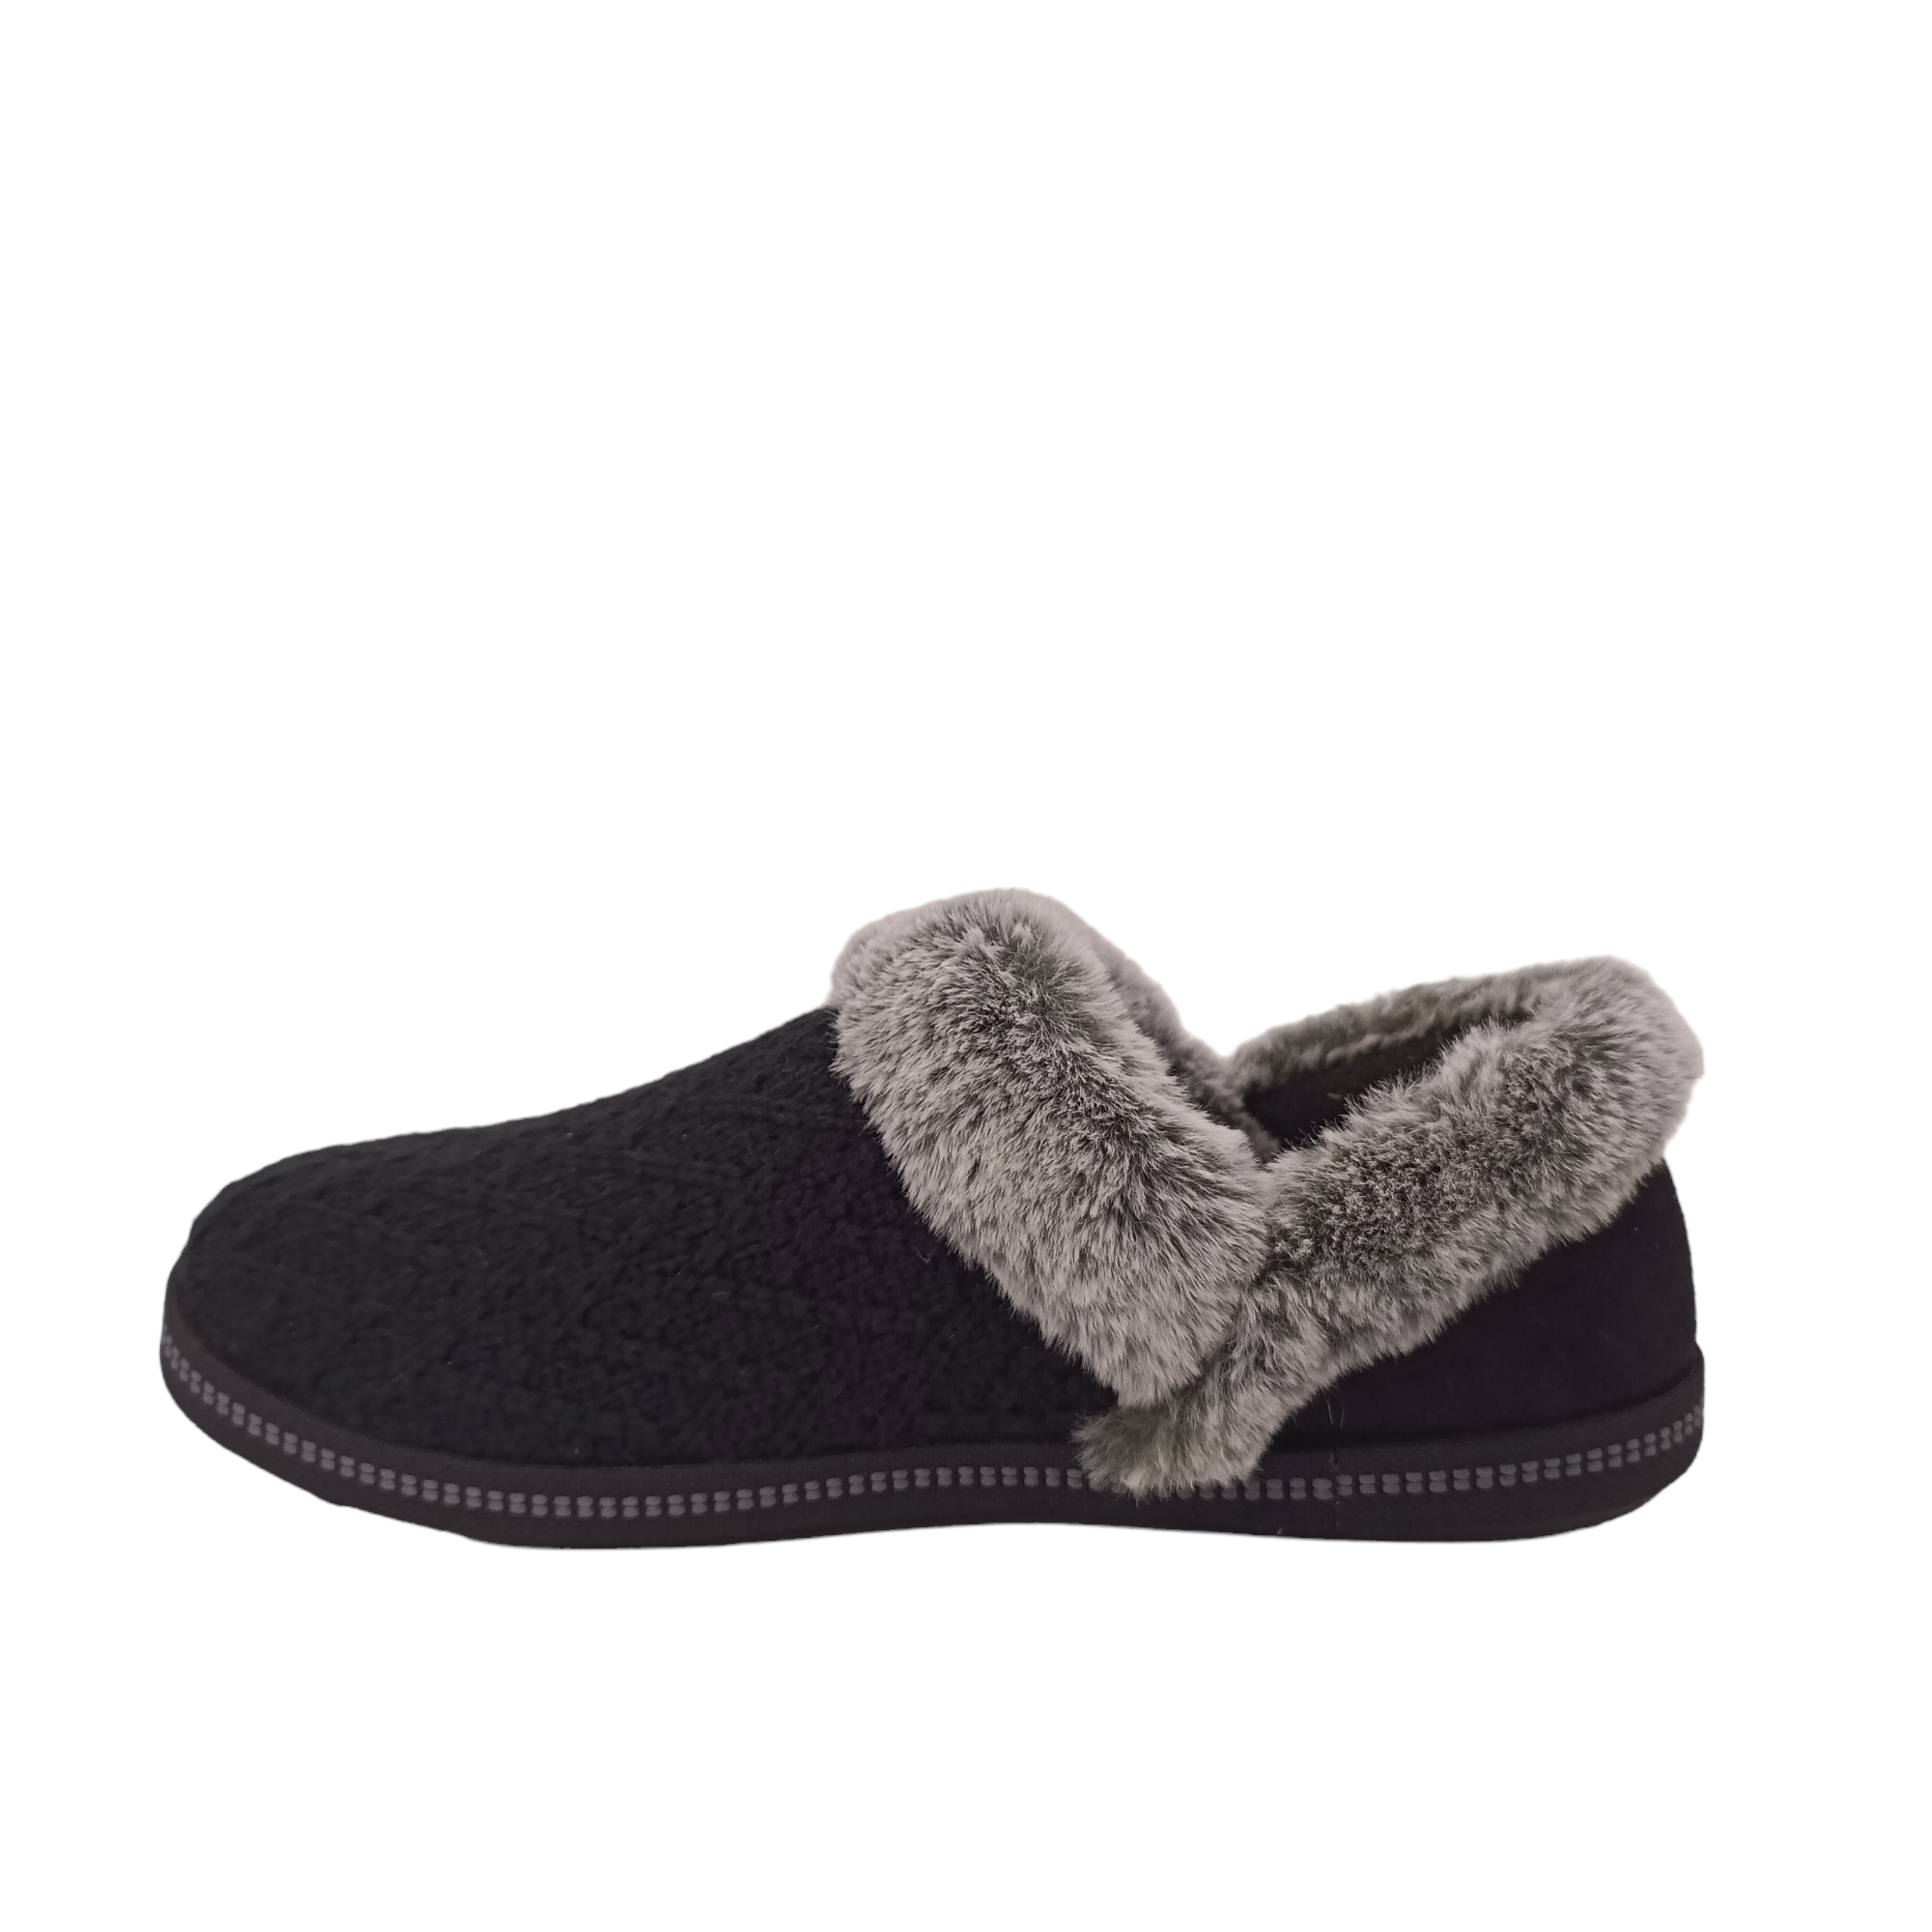 Shop Girls Night In Skechers - with shoe&amp;me - from Skechers - Slippers - Slippers, Winter, Womens - [collection]